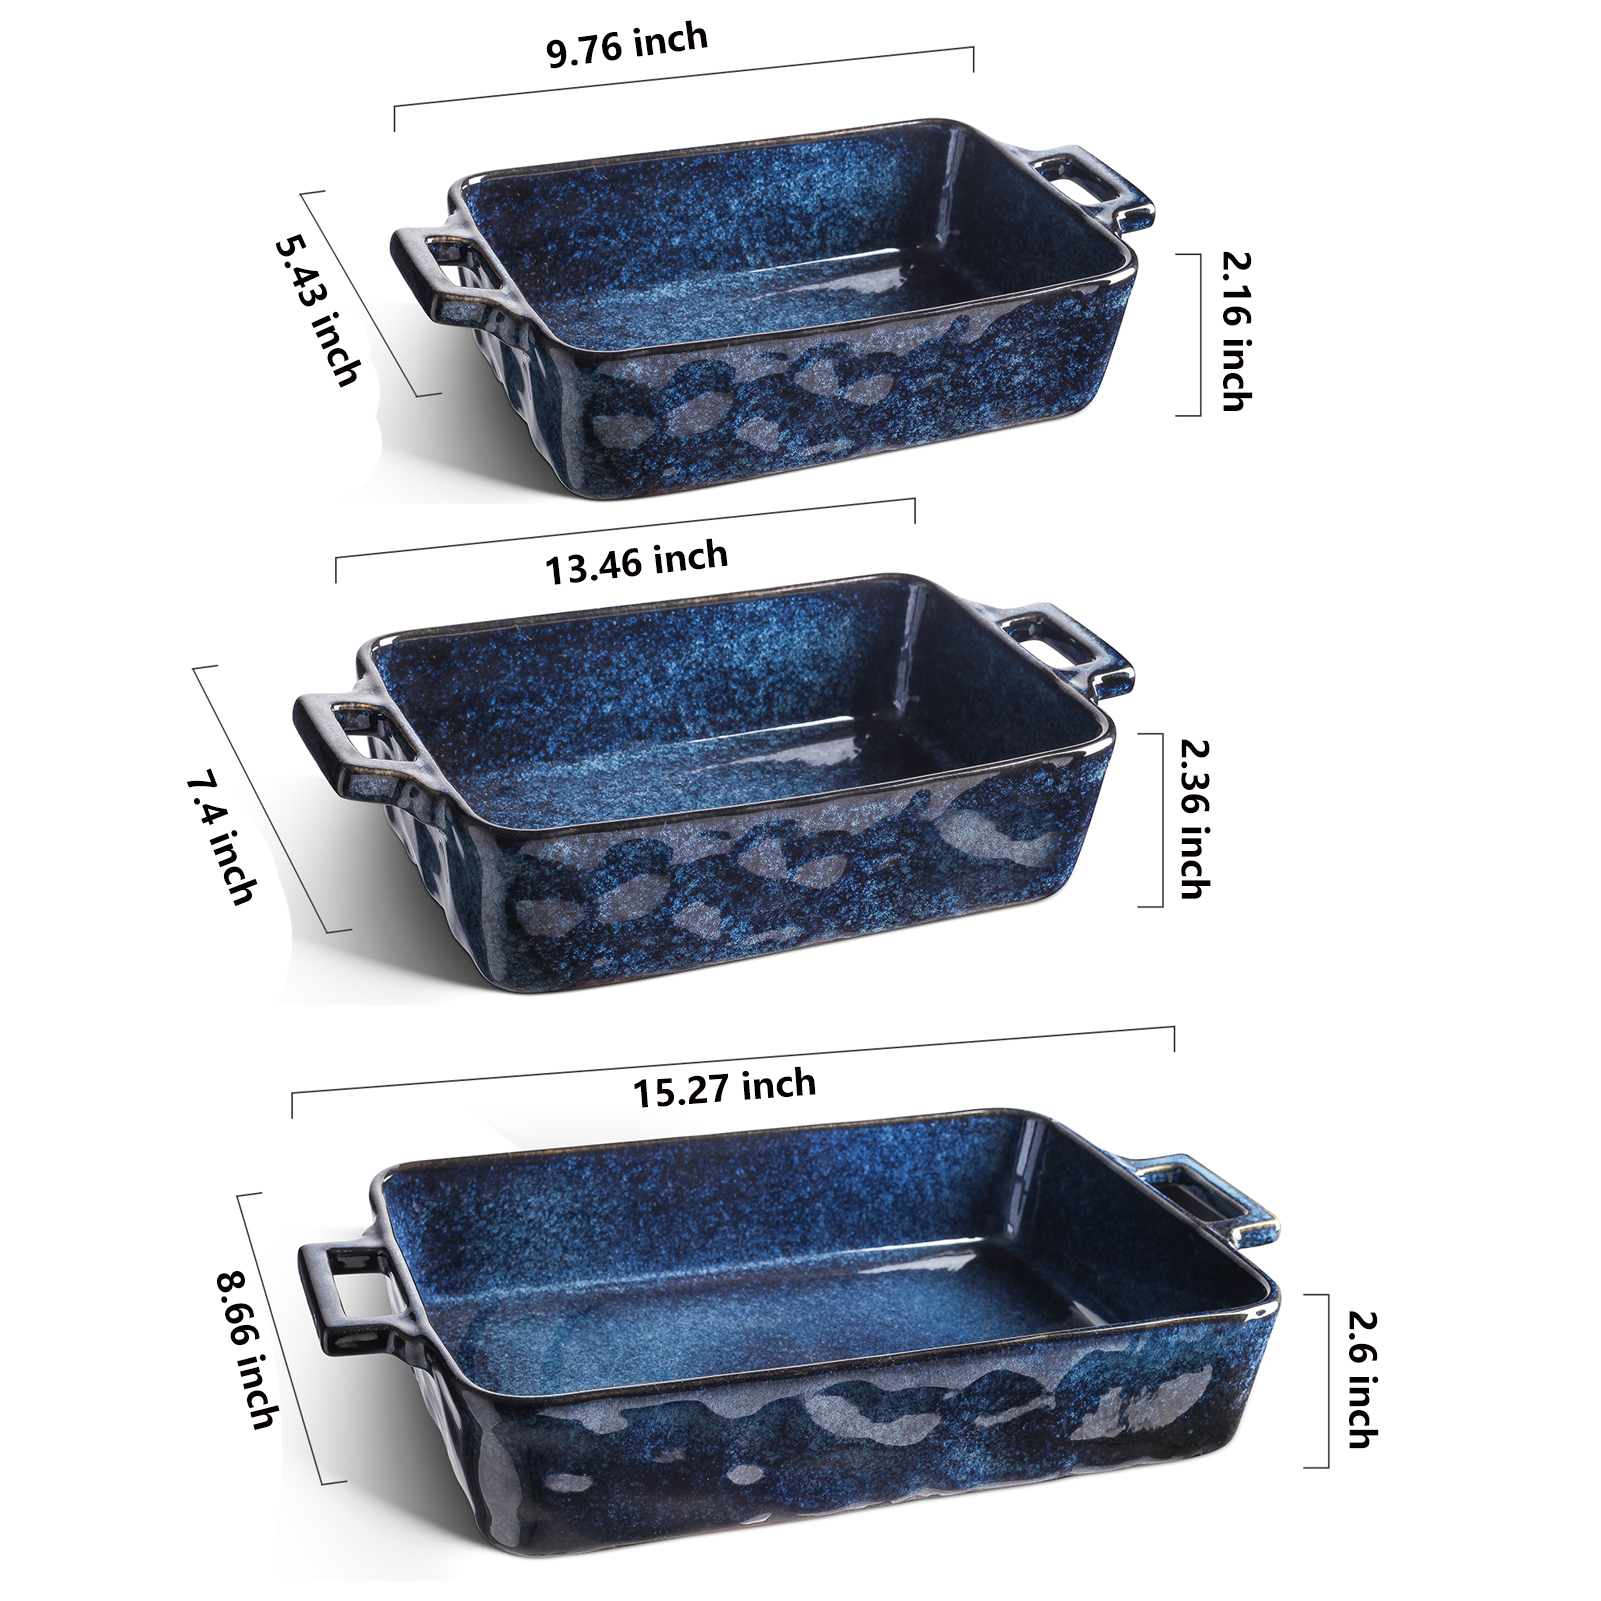 Vicrays Casserole Dish with Lid - Ceramic Lasagna Pan Deep 2 Quart Round  Baking Dishes Covered Bakeware for Oven Safe Serving Dish with Handles for  Party Dinner Banquet Daily Use (Starry Blue) 